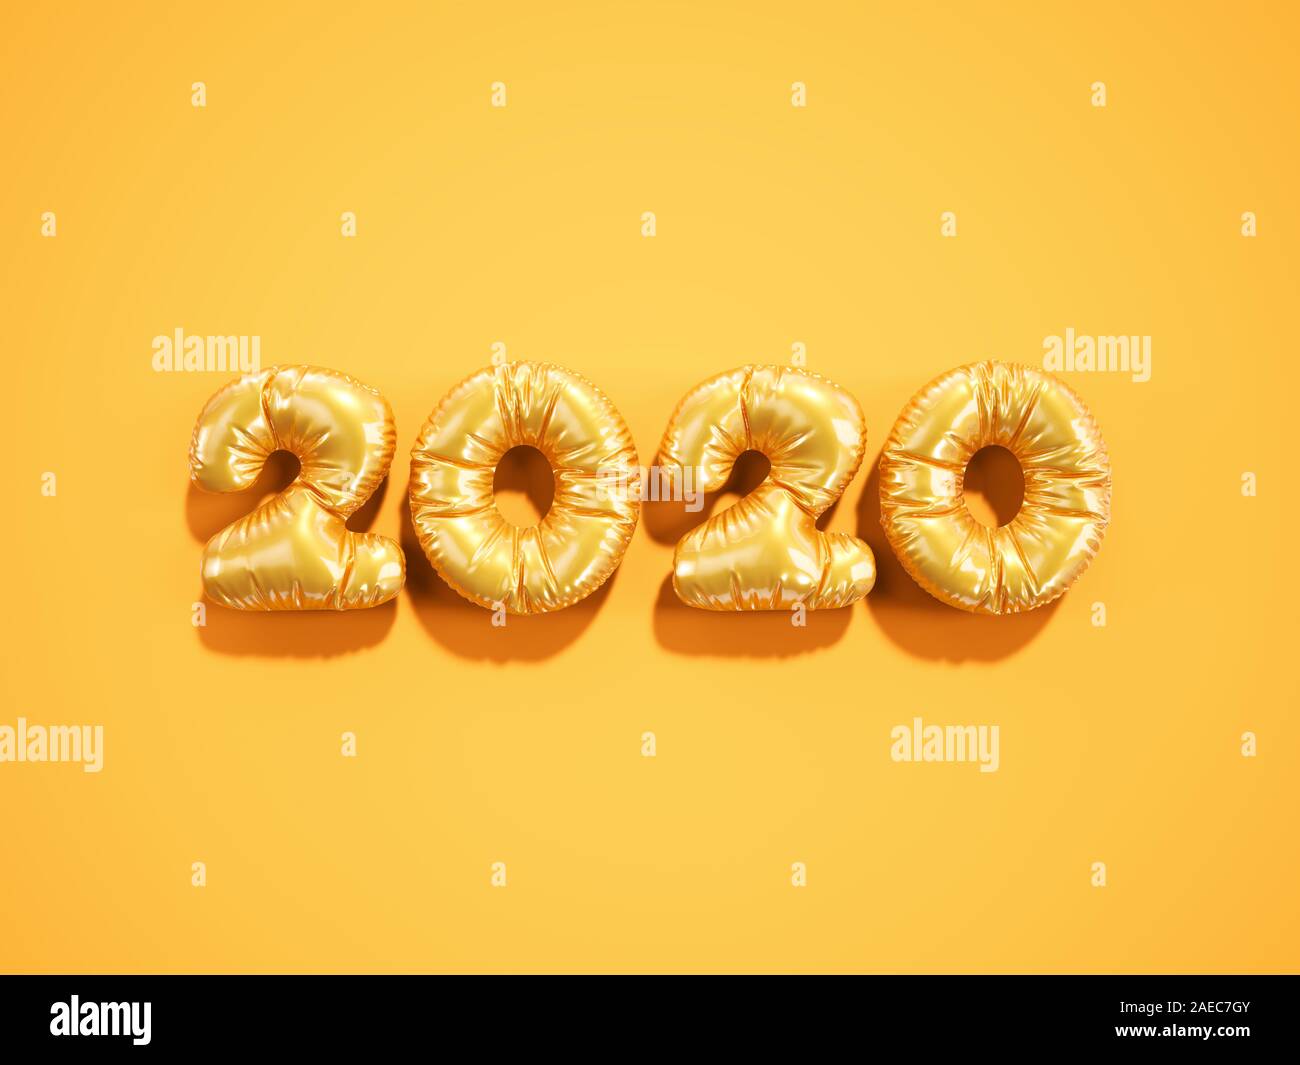 Christmas and Happy new year 2020 balloon orange golden numbers on a yellow background. 3d rendering Happy New Year 2020 logo design. Stock Photo